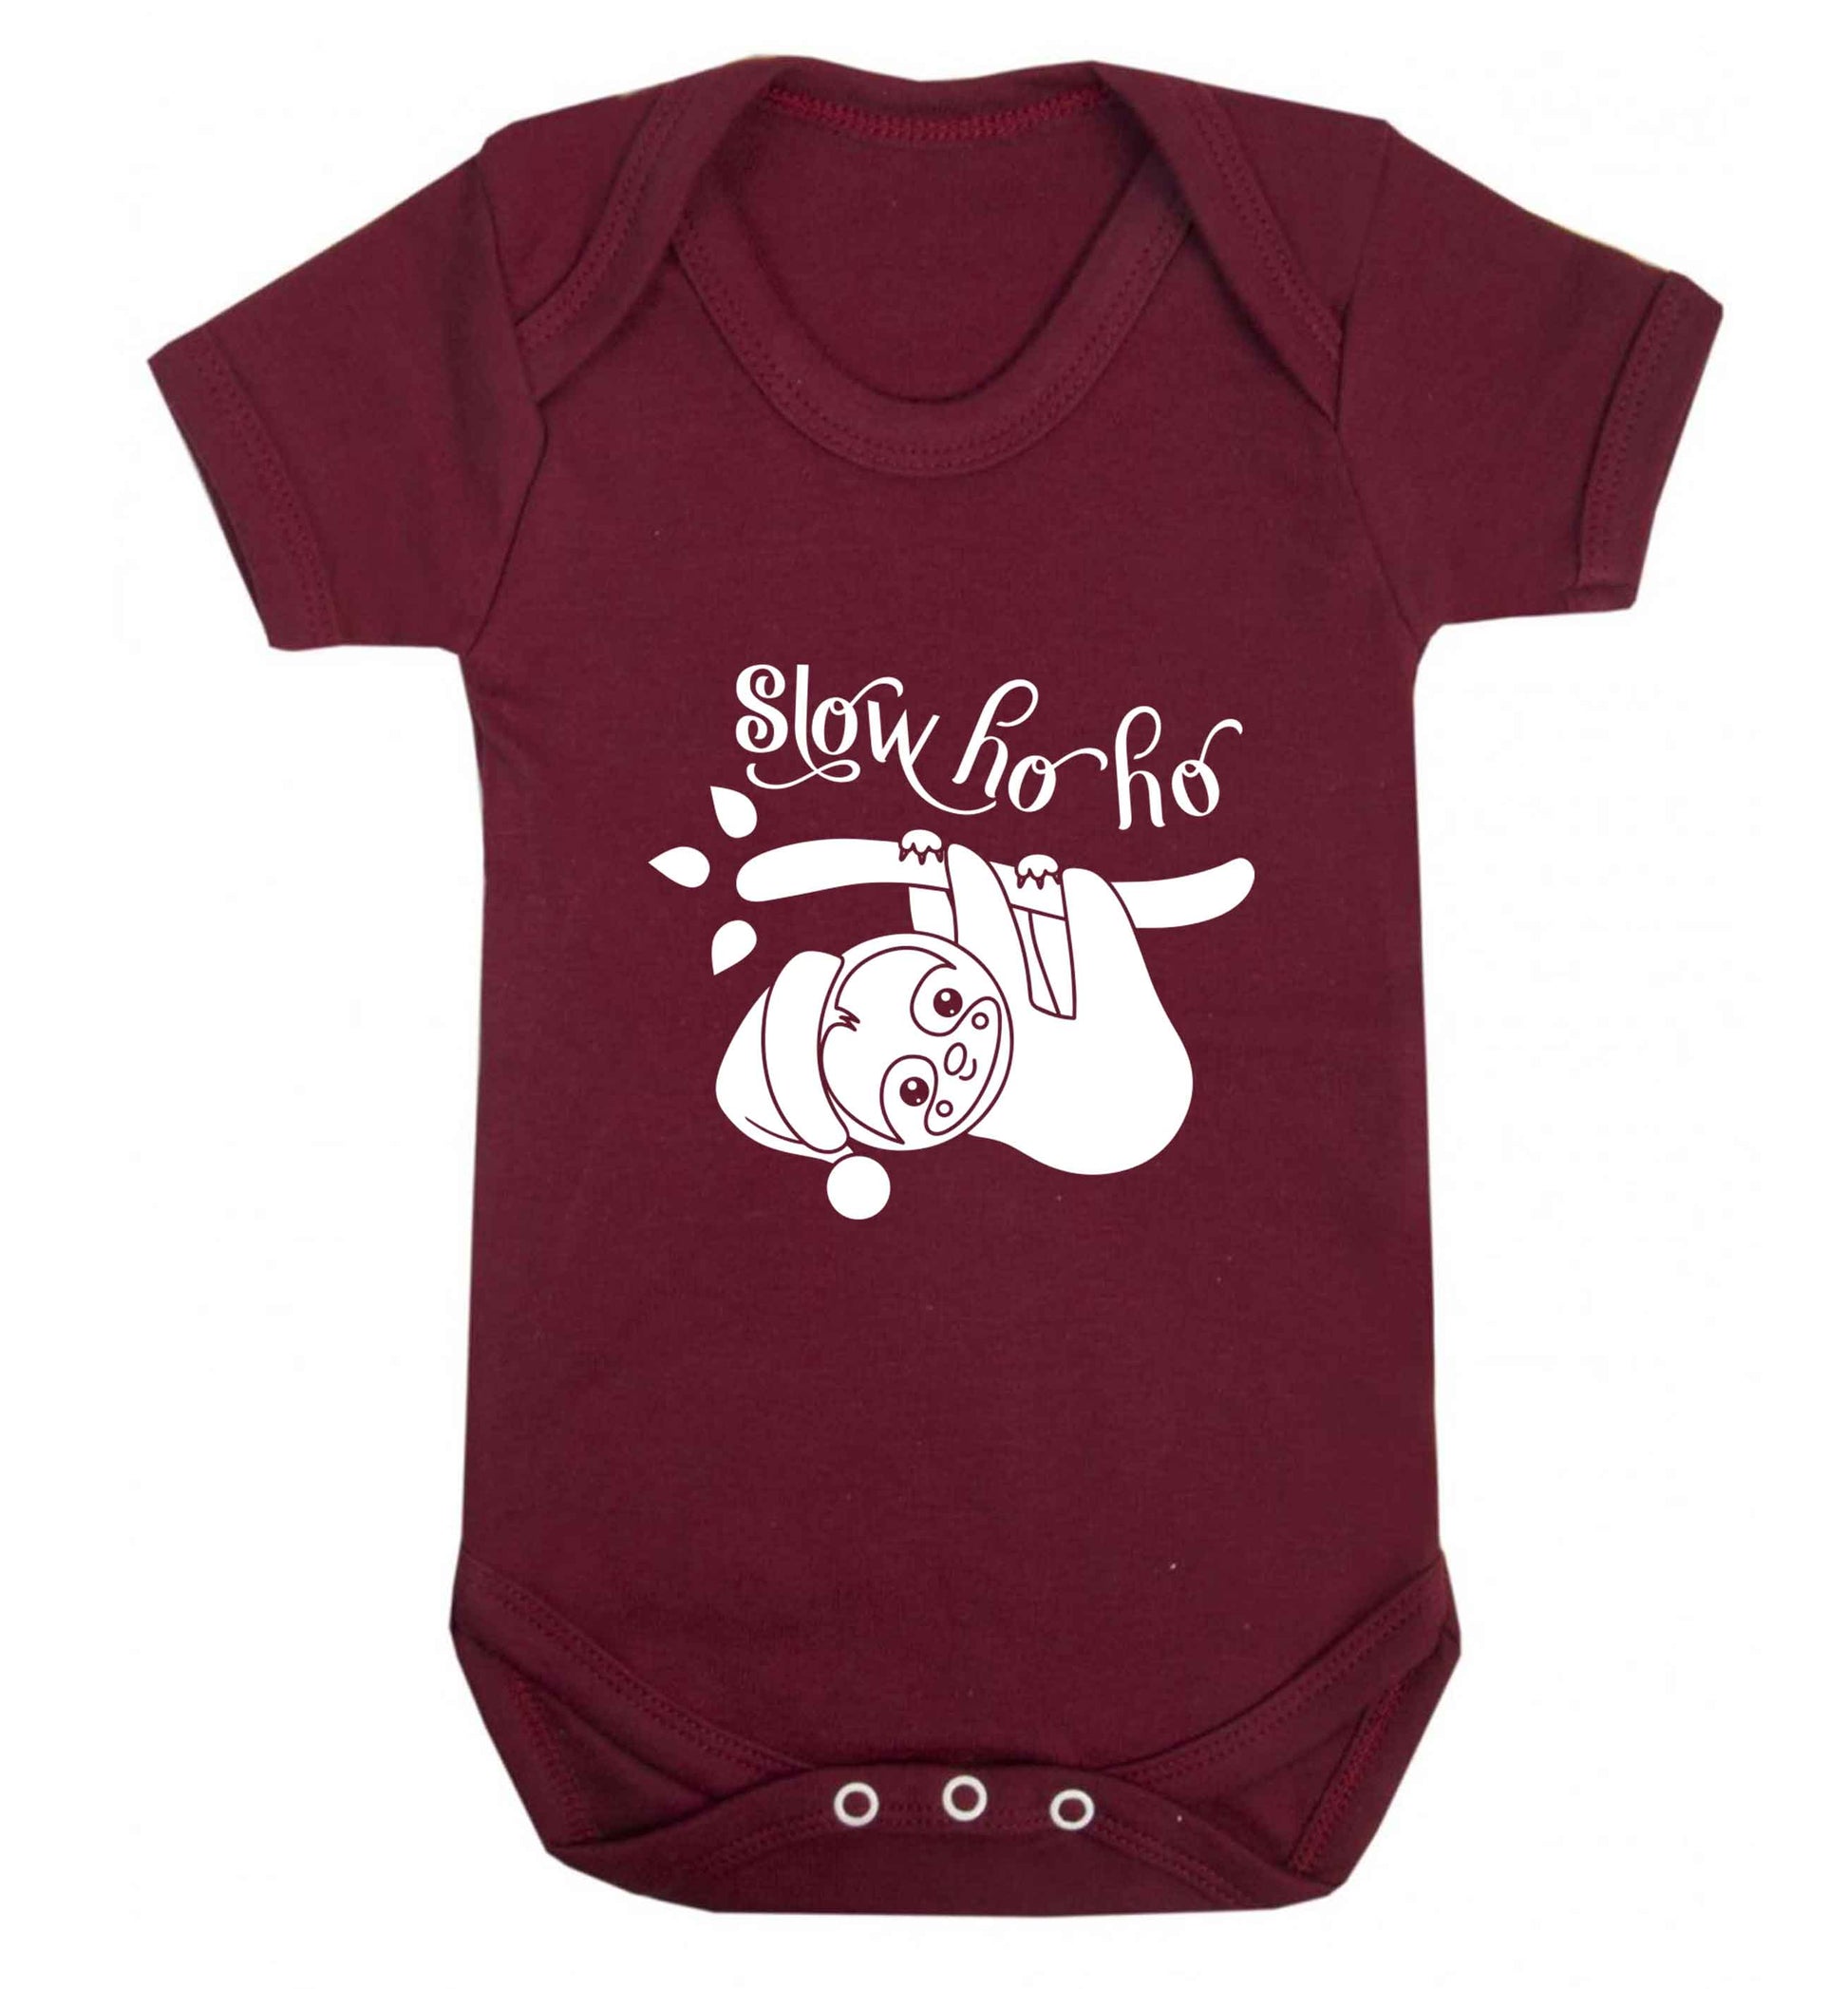 Slow Ho Ho baby vest maroon 18-24 months